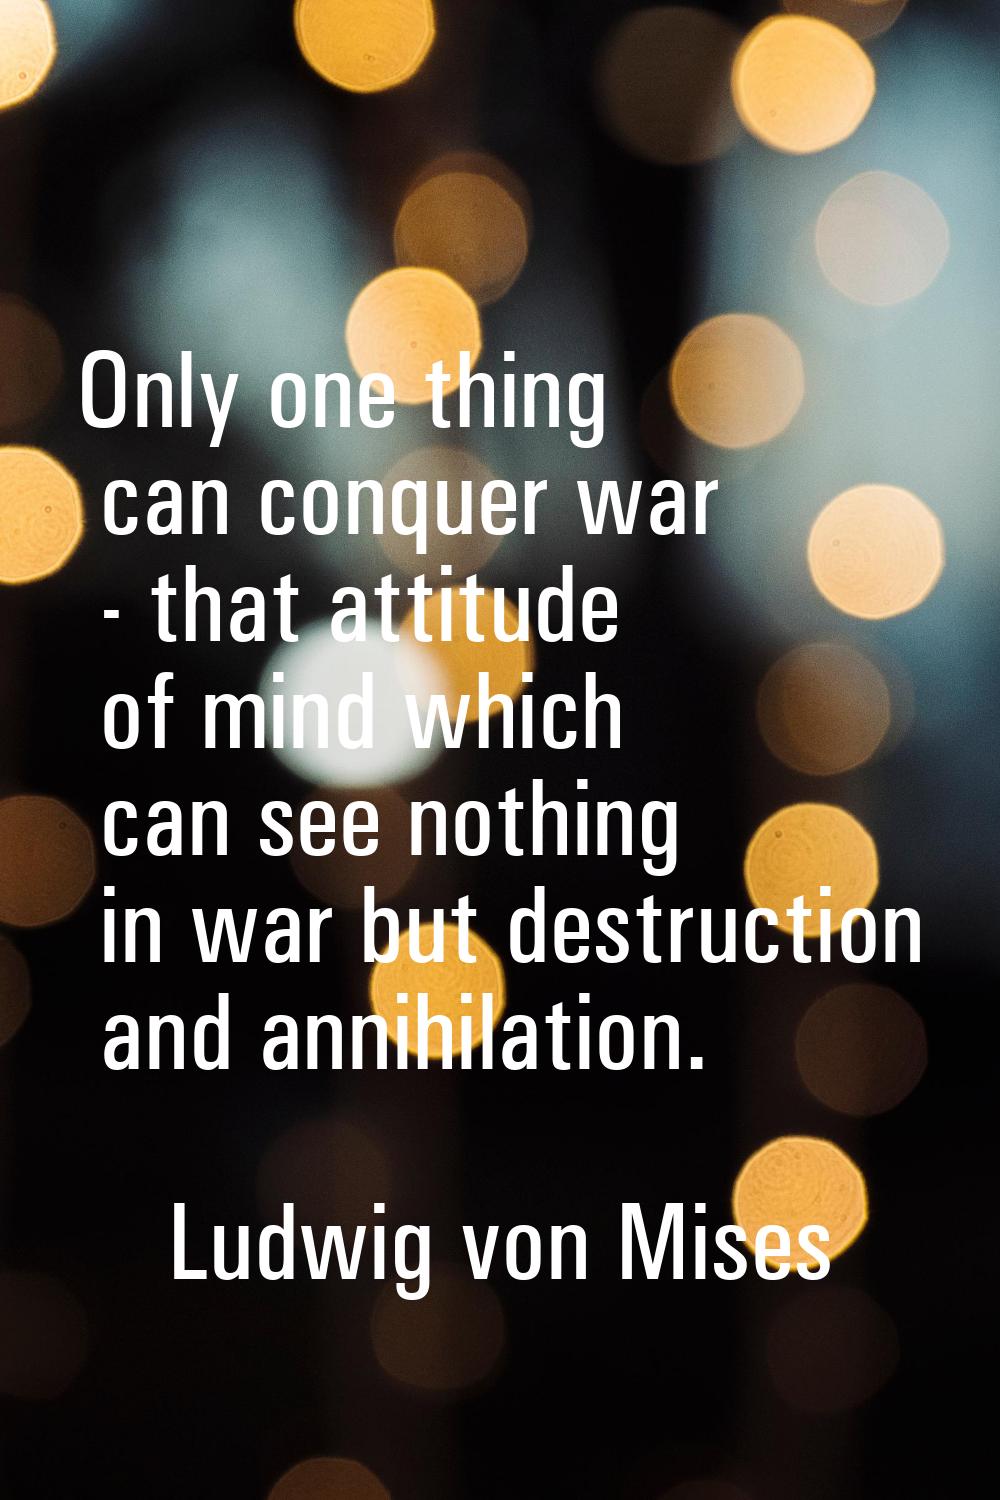 Only one thing can conquer war - that attitude of mind which can see nothing in war but destruction